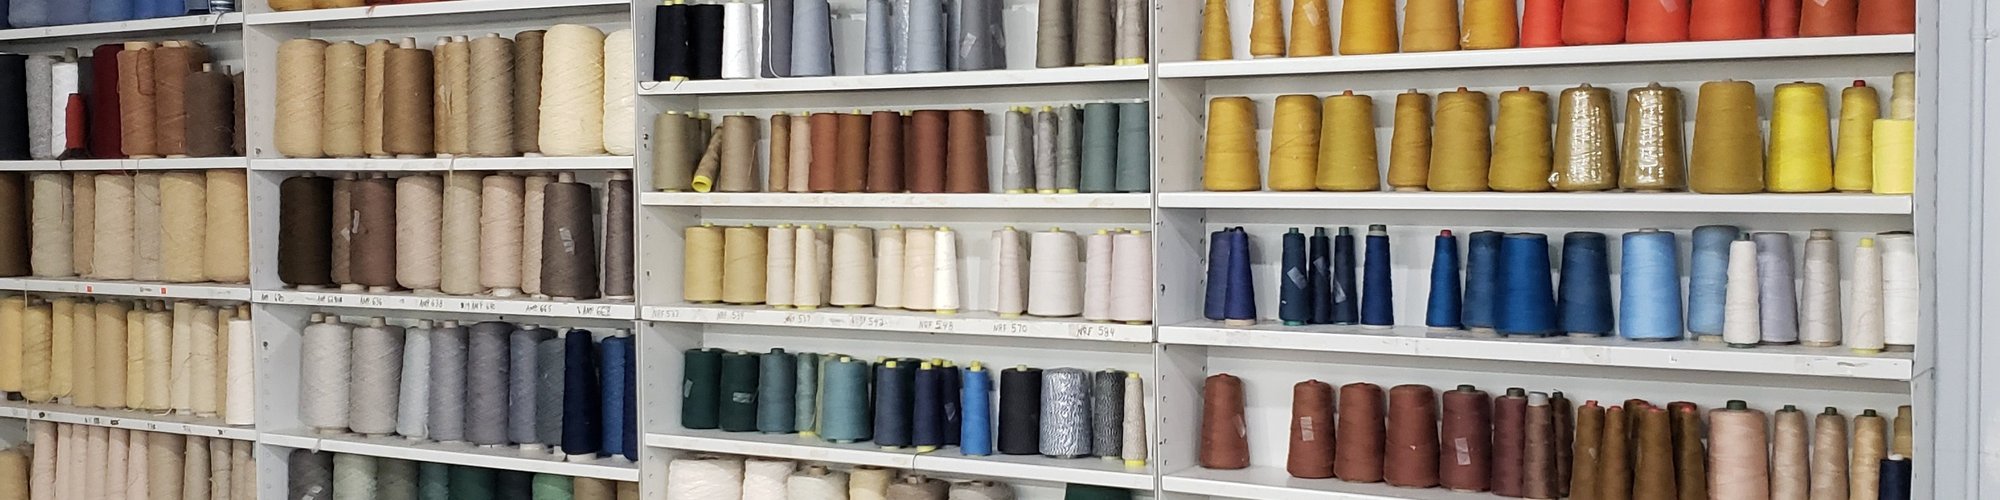 Wide Variety Of Carpet Mending And Serging Materials On A White Shelf